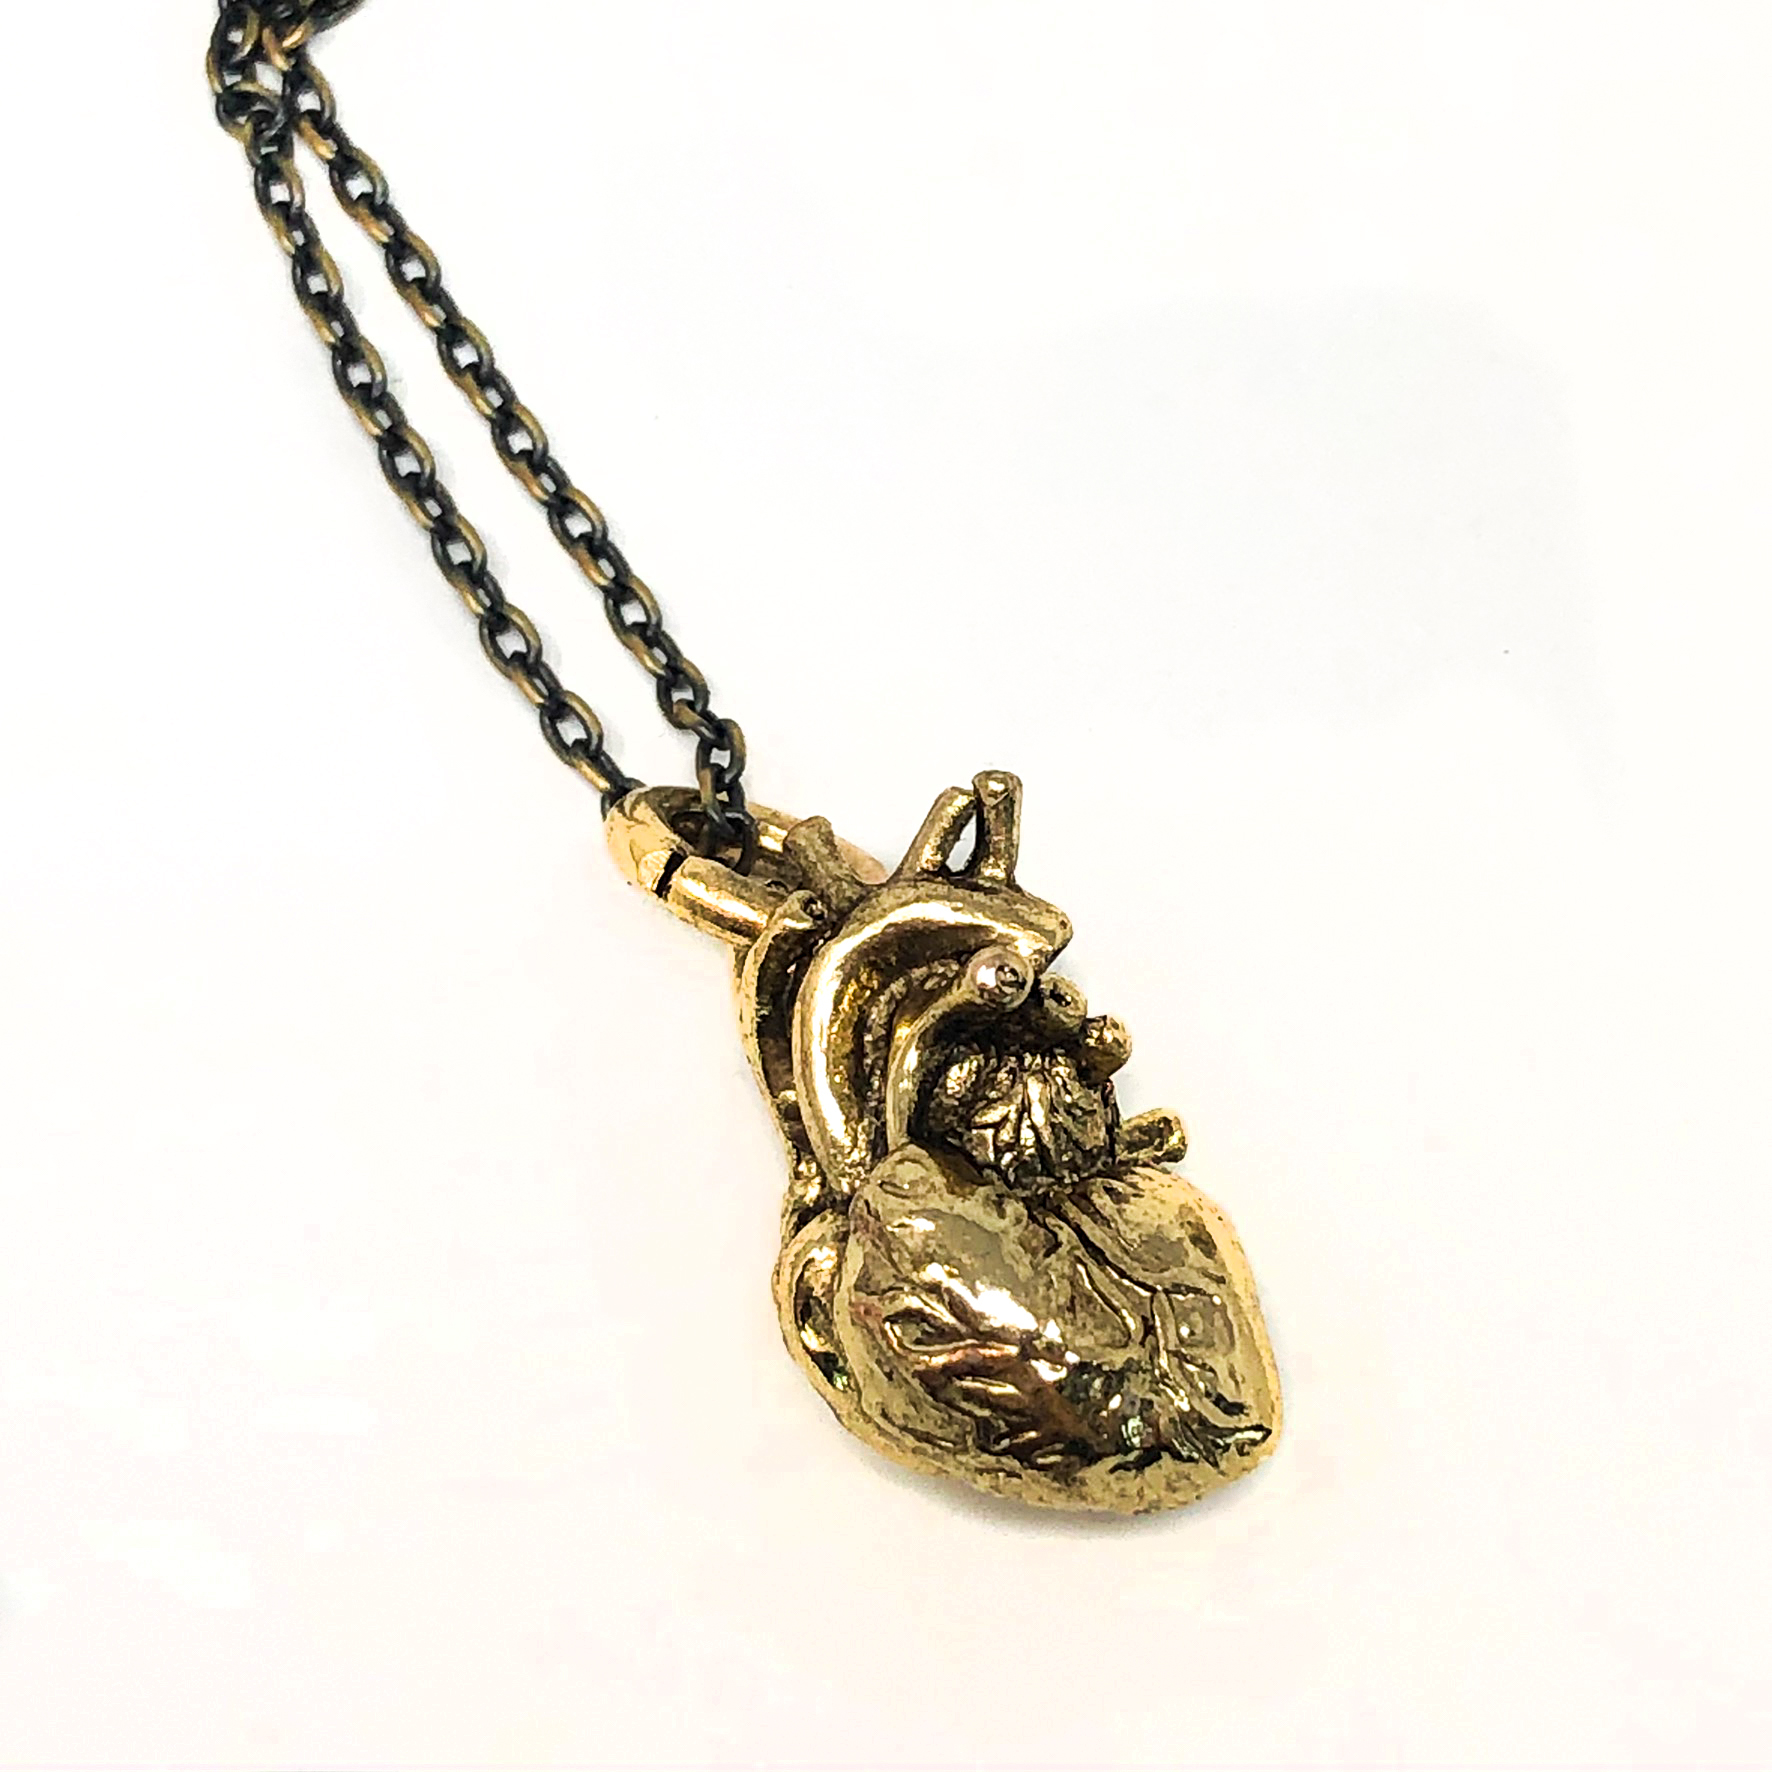 An anatomical depiction of the human heart in brass